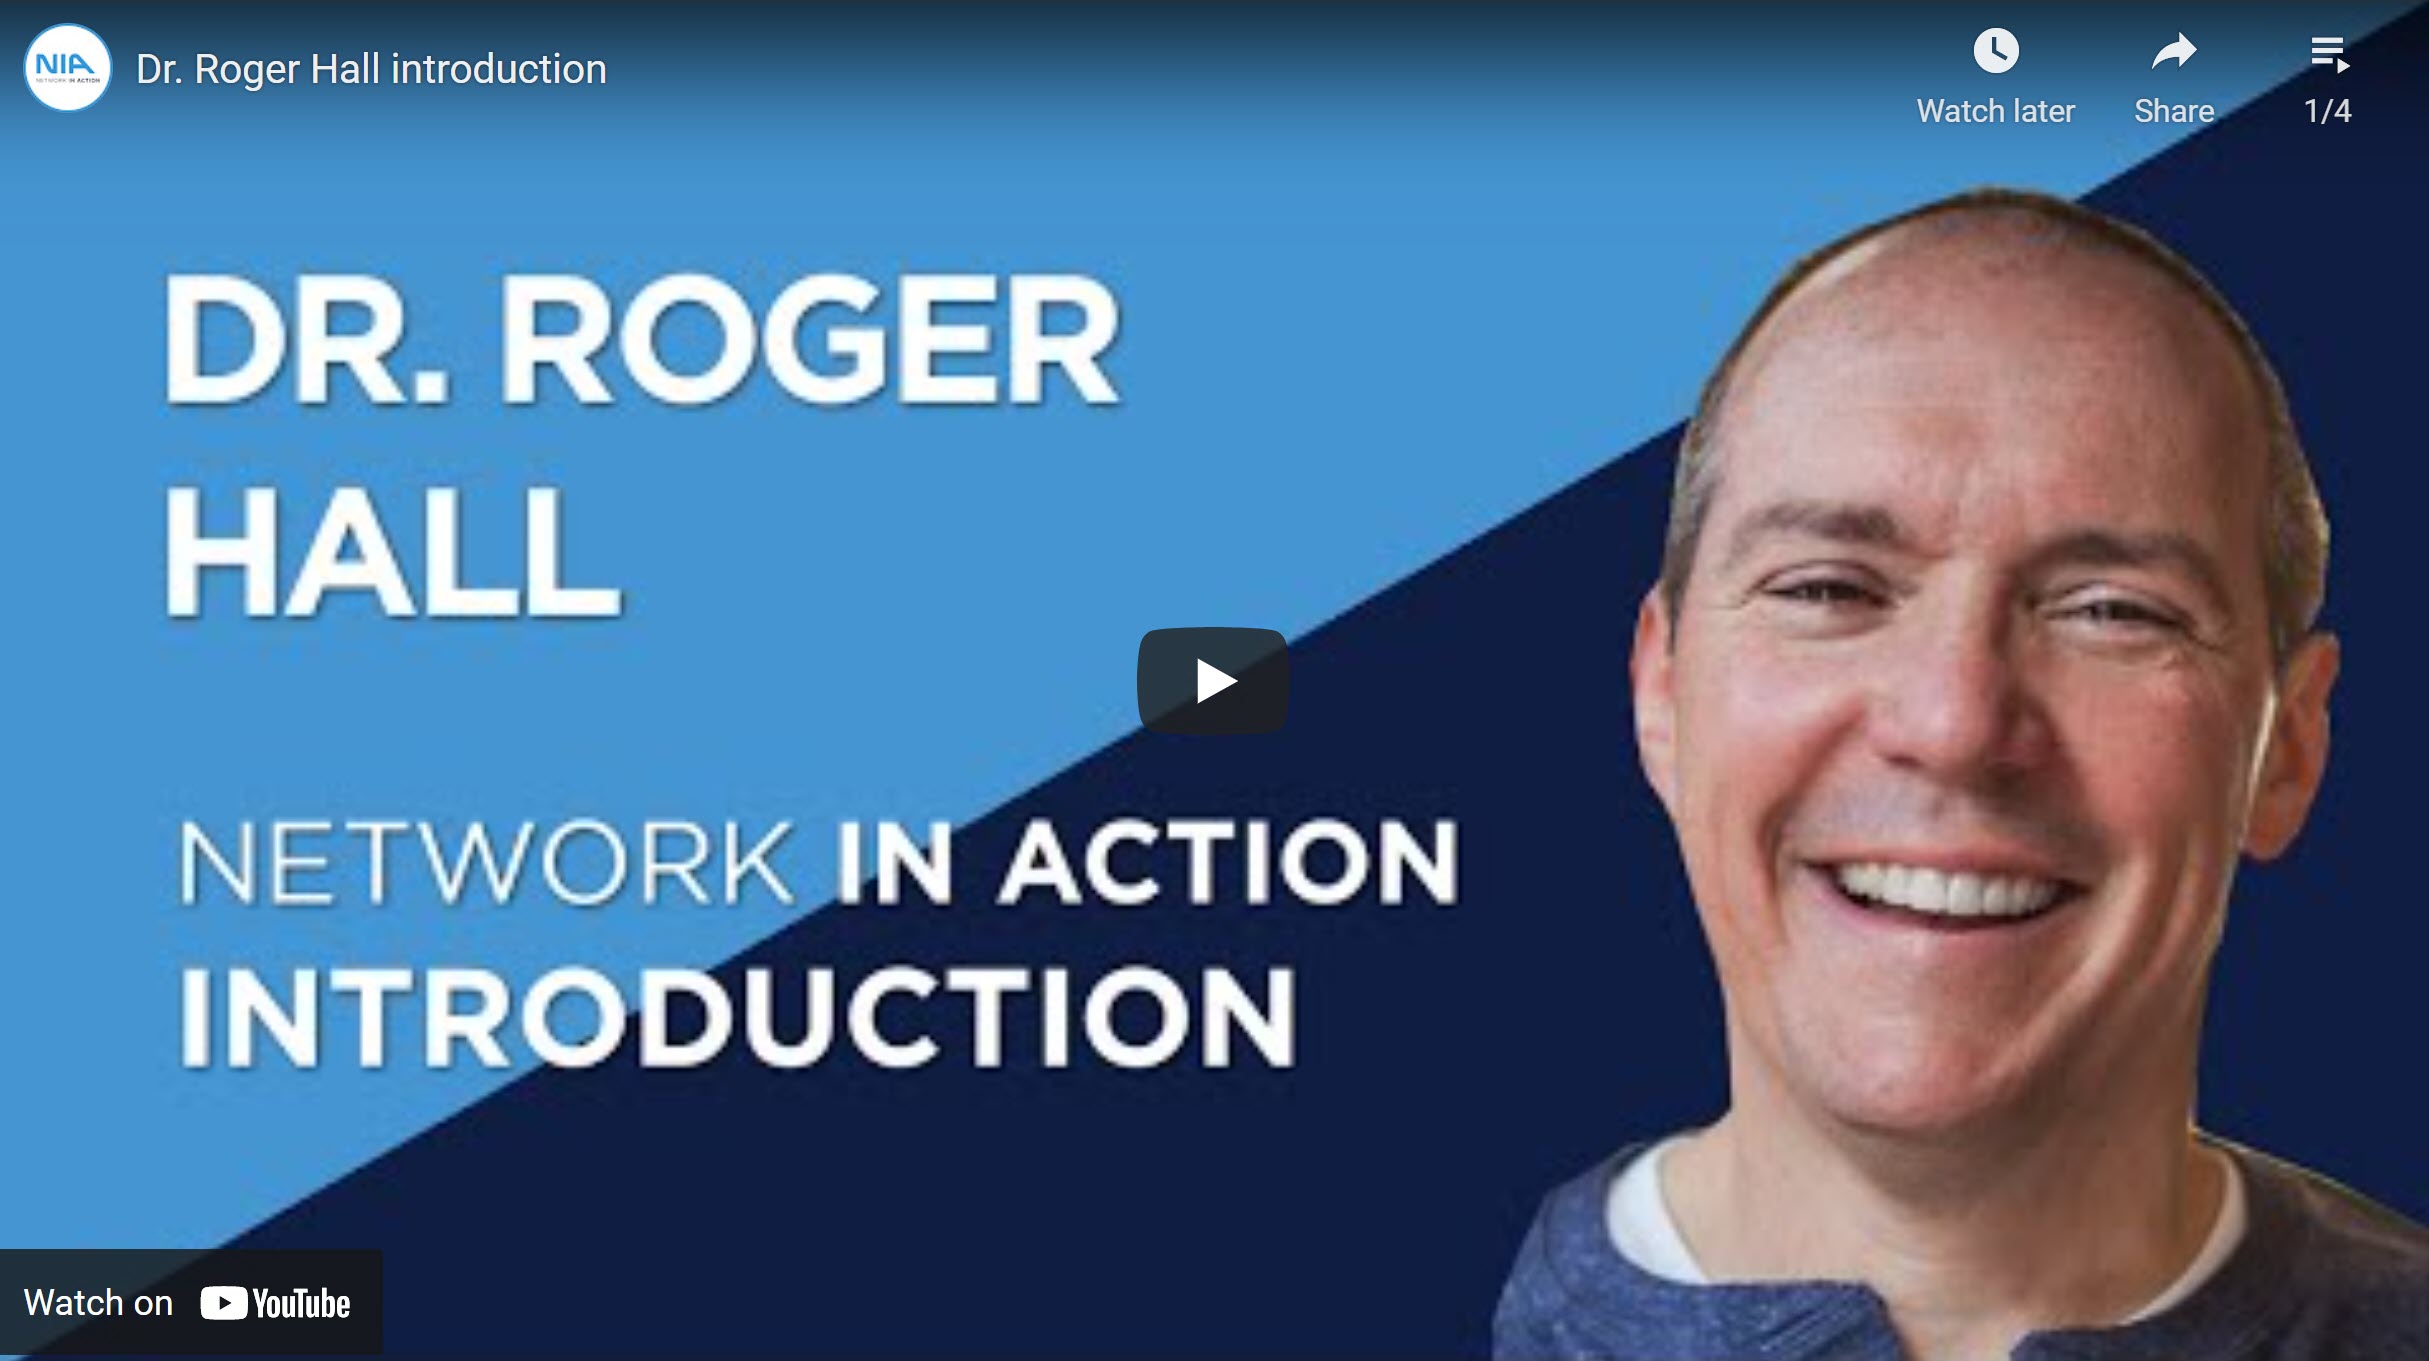 Introducing Dr. Roger Hall - Network In Action - Dr. Roger Hall